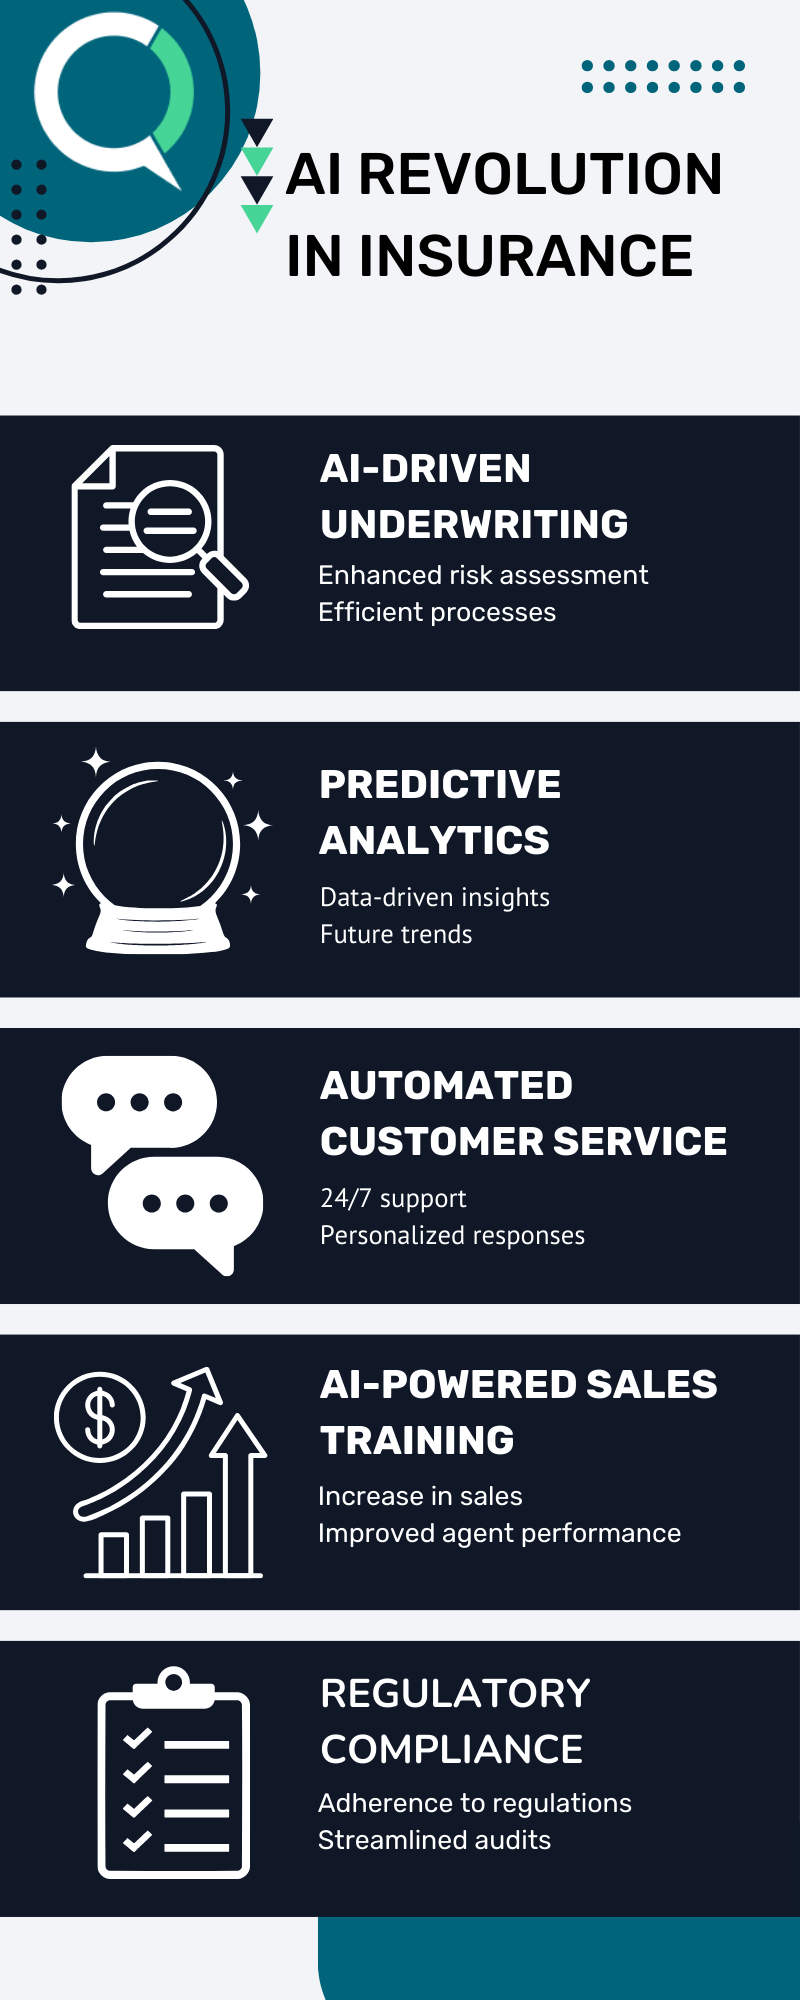 The infographic for AI Revolution in Insurance is broken down into five parts. AI-Driven underwriting, Predictive Analytics, Automated customer service, AI-Powered Sales Training, and Regulatory Compliance